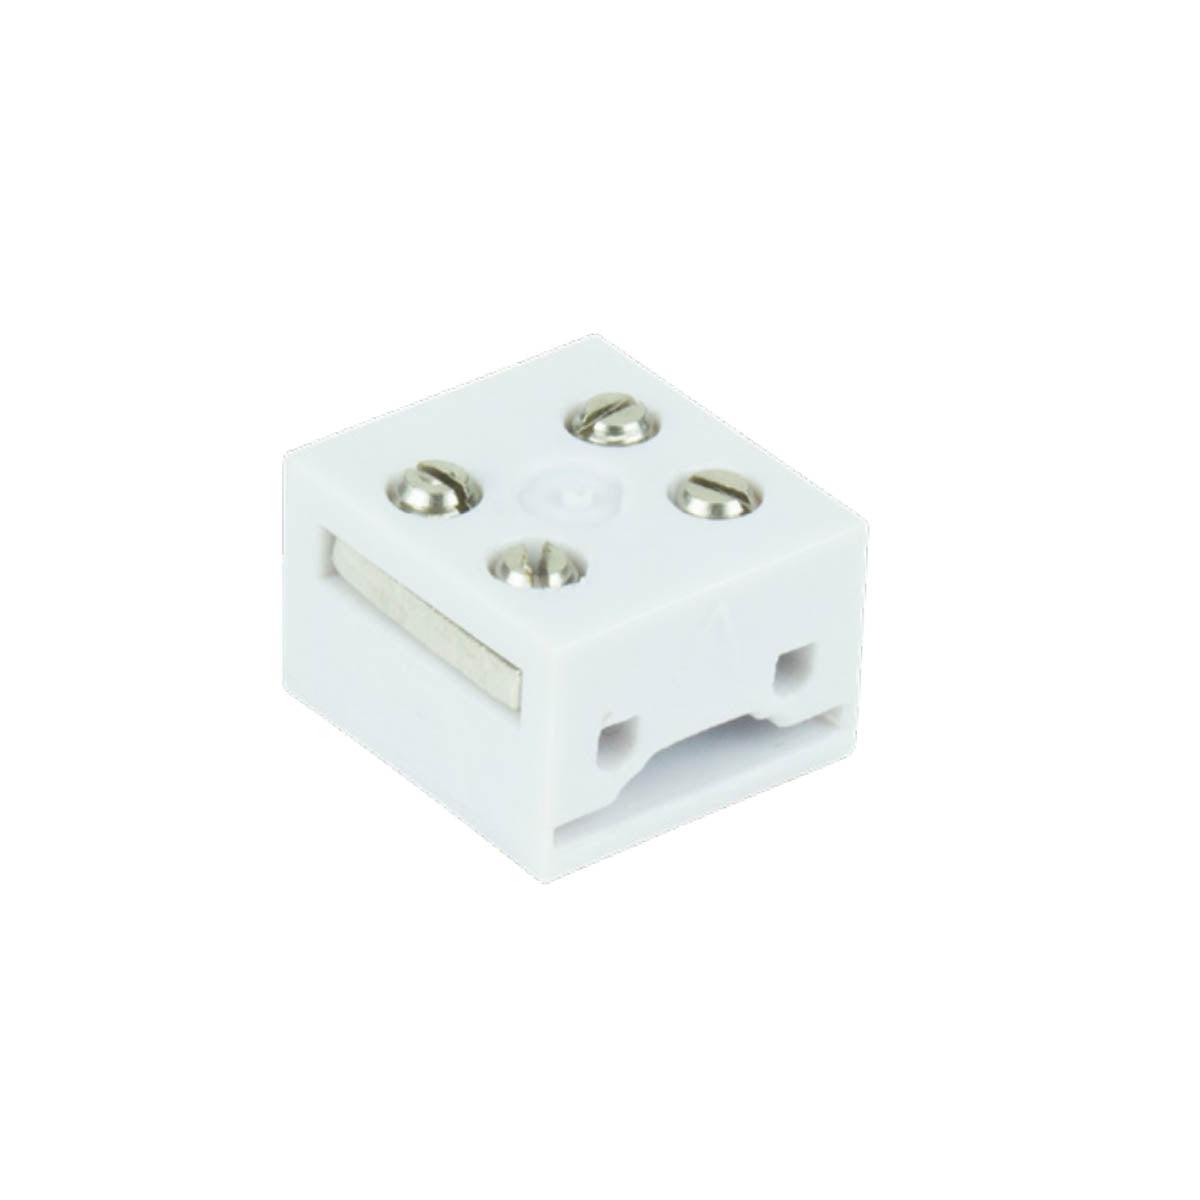 Trulink 4-in-1 Connector Block, Pack of 10